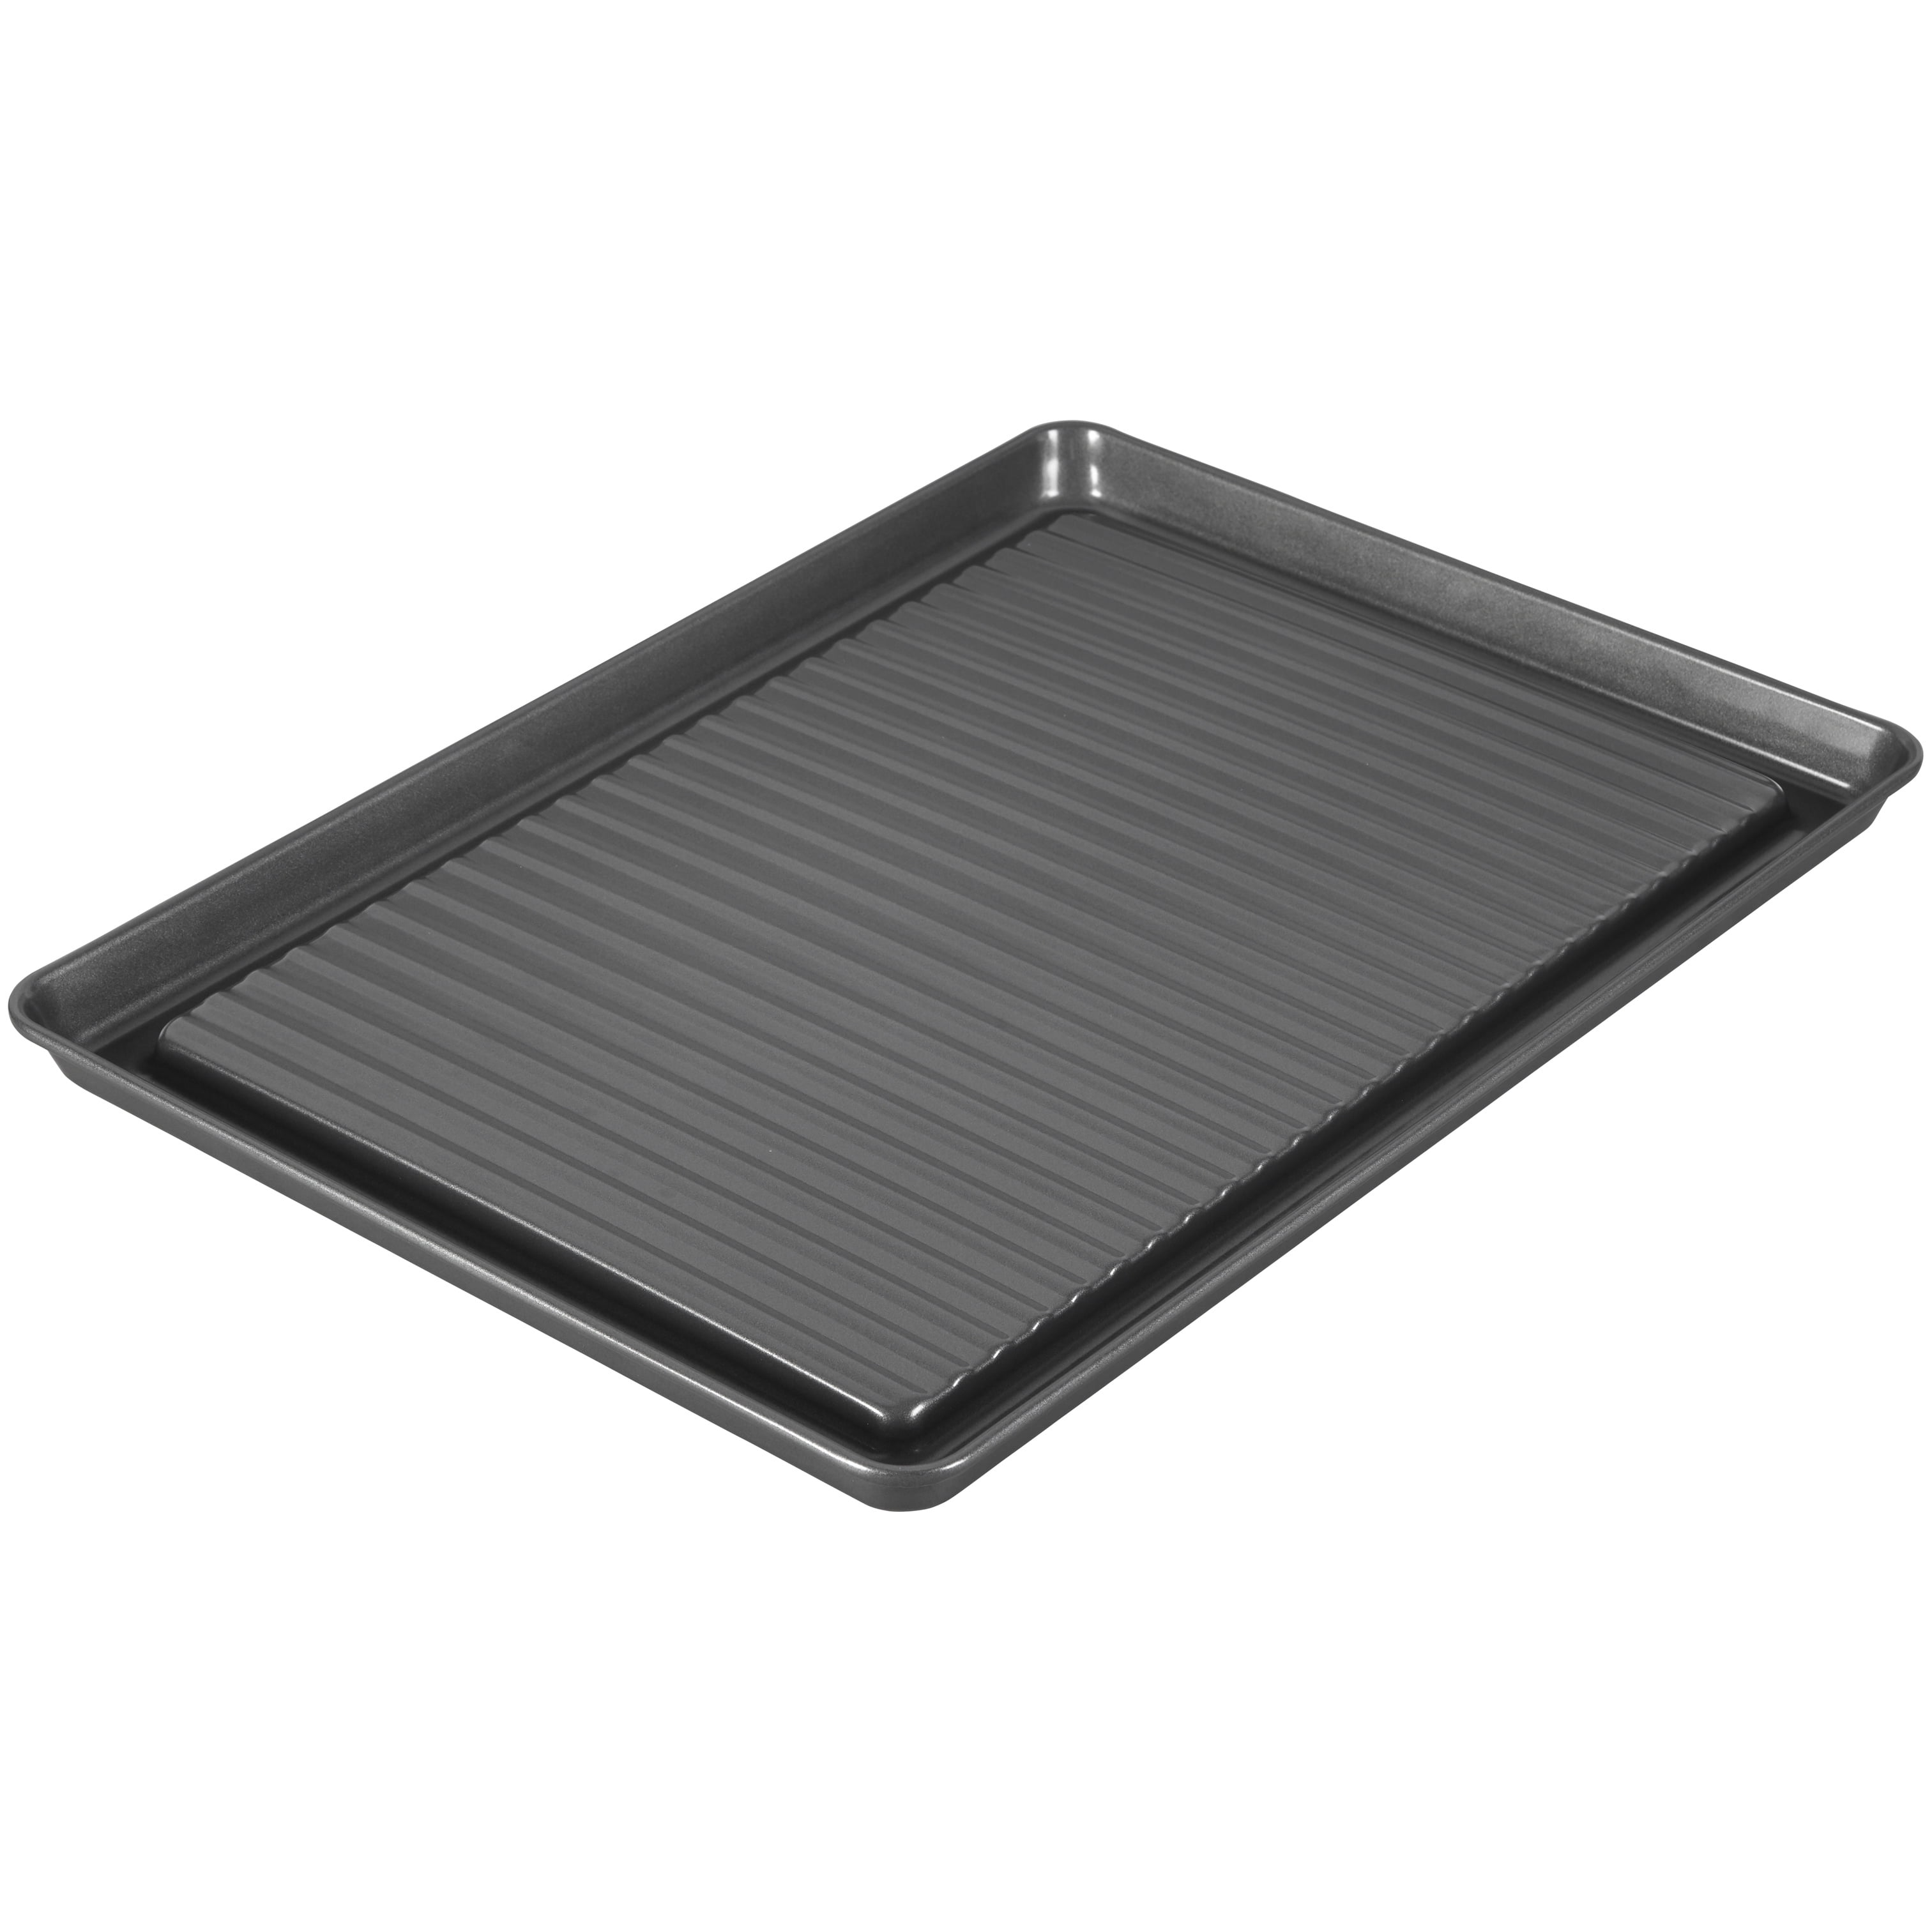 15 x 20-Inch Wilton Non-Stick Griddle and Bacon Pan